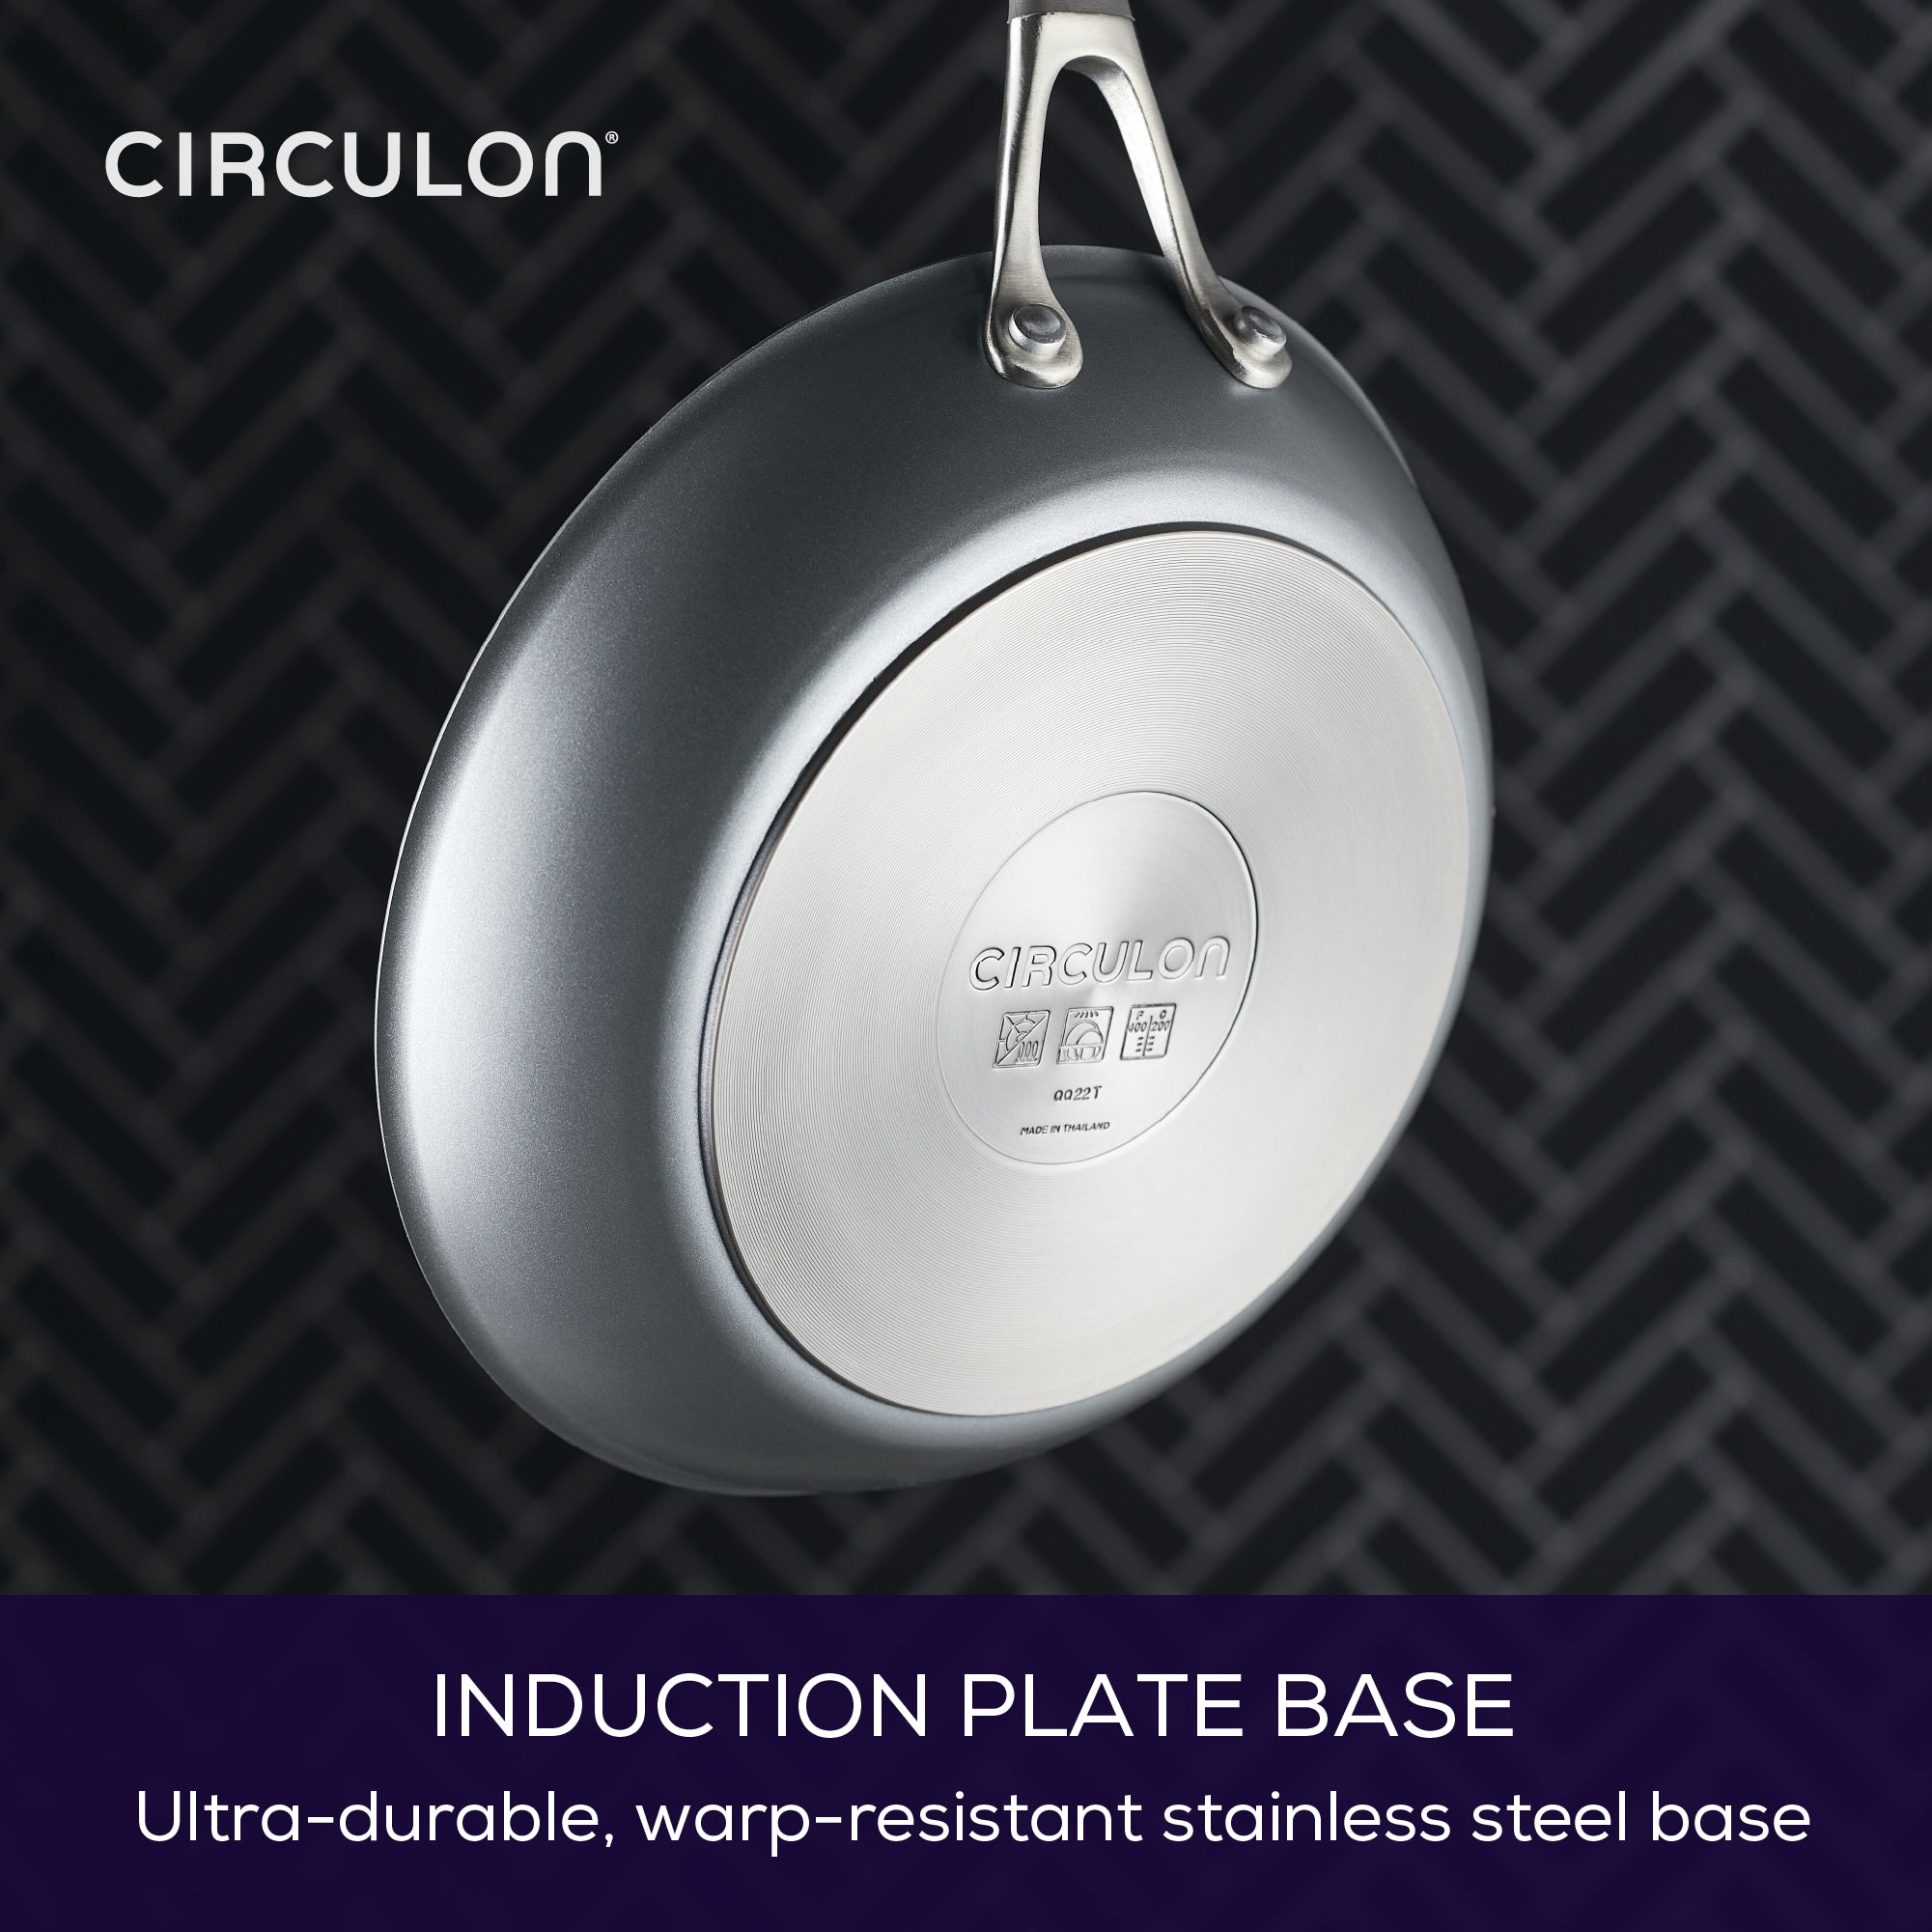 ScratchDefense Extreme Non-Stick Induction Frying Pan - 2 Sizes